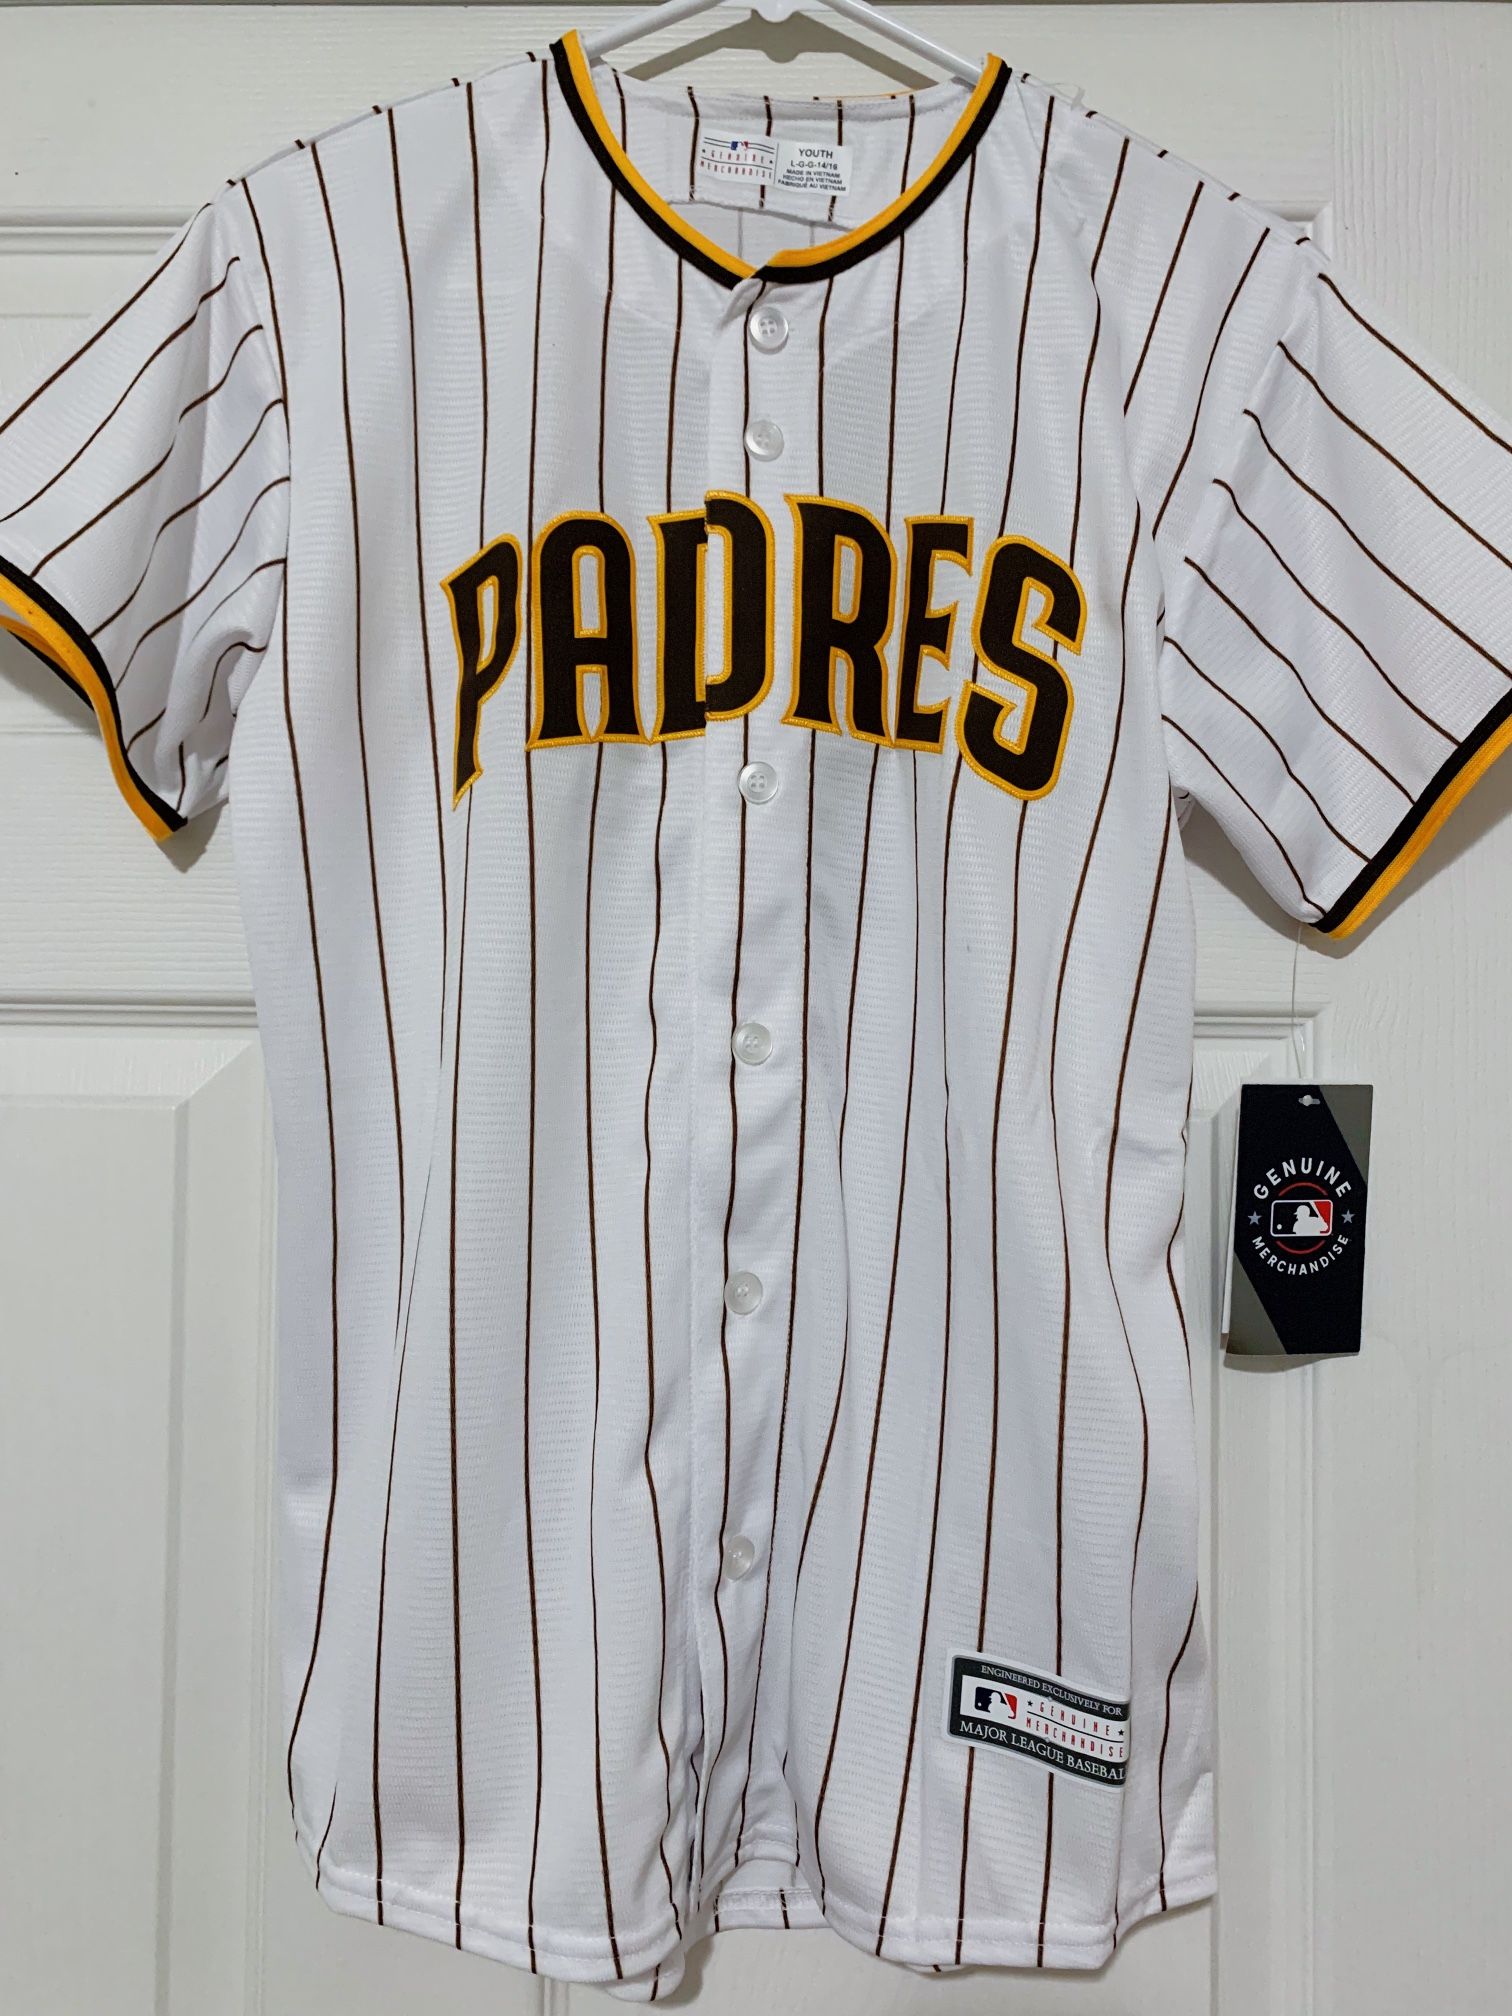 New San Diego Padres Youth Manny Machado #13 Home Jersey